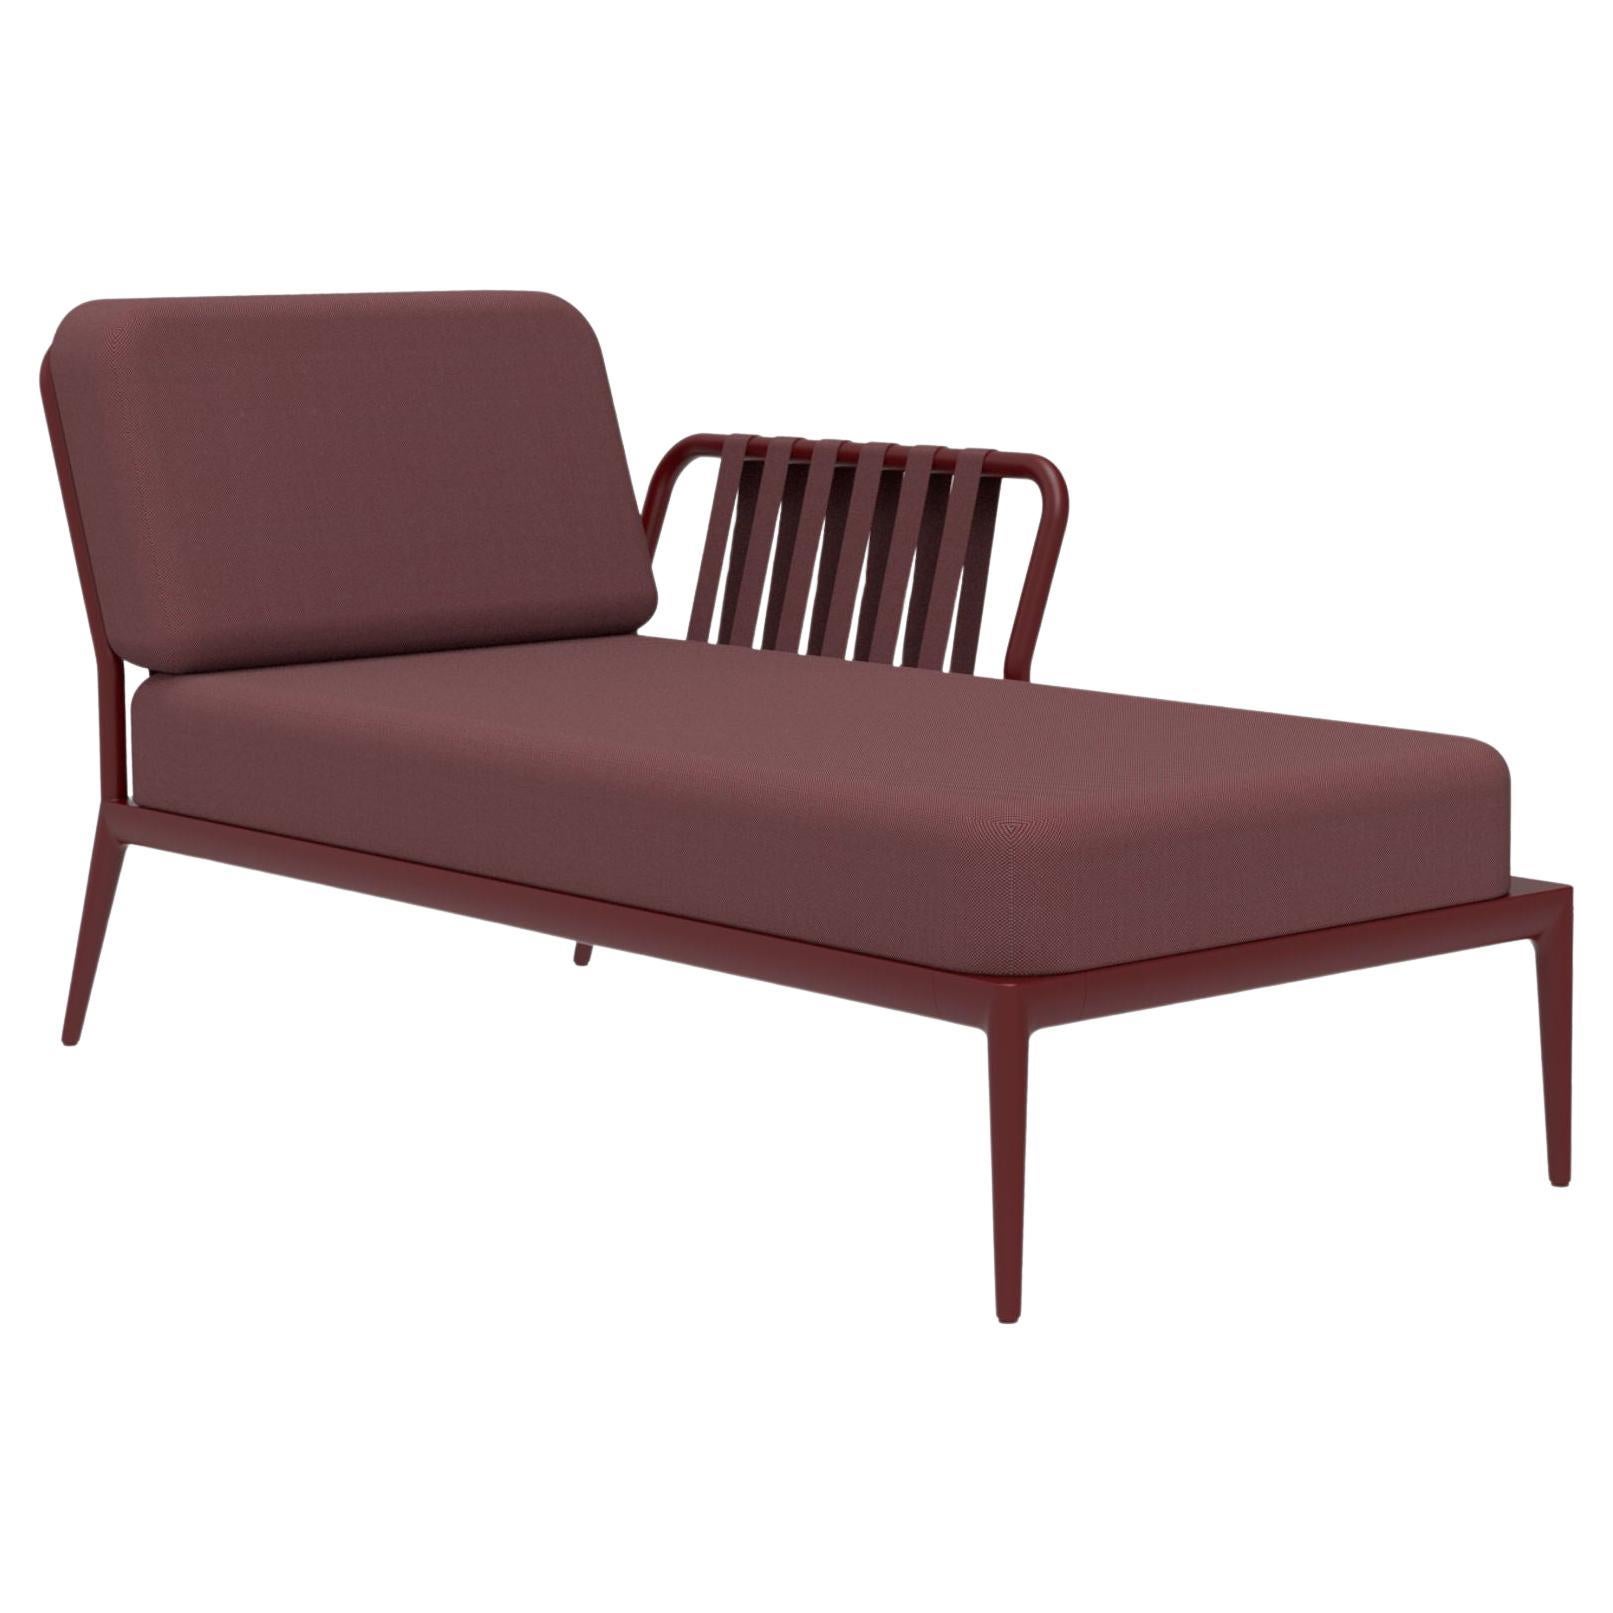 Ribbons Burgundy Left Chaise Longue by MOWEE For Sale